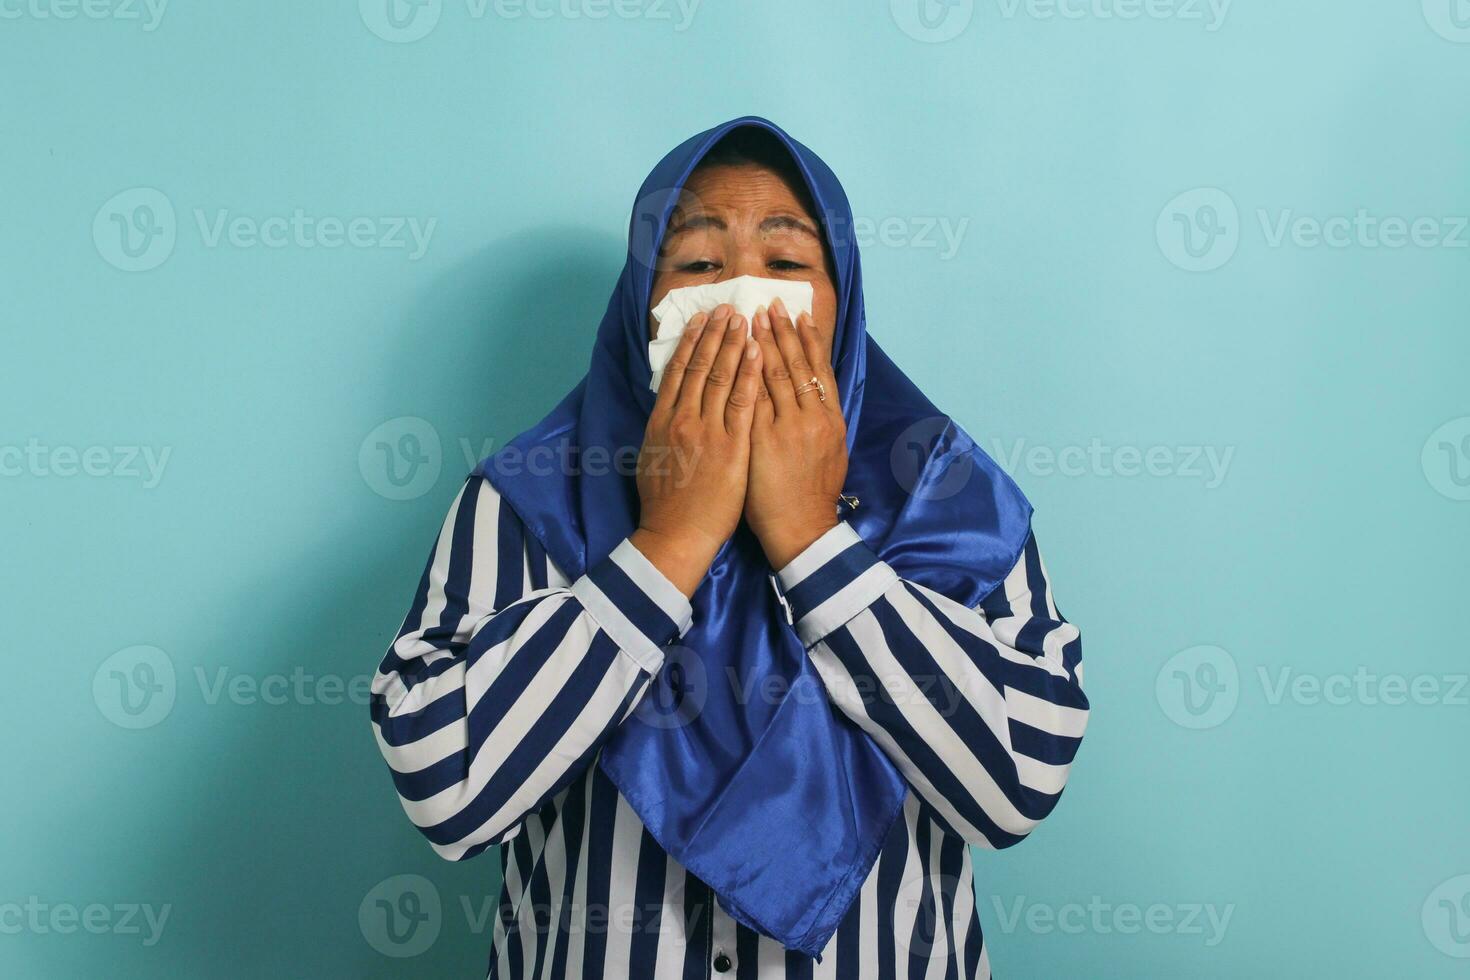 unhealthy middle-aged Asian woman, wearing a blue hijab and a striped shirt, is seen blowing her runny nose with a tissue while sneezing due to the flu. Healthcare and medical concept photo